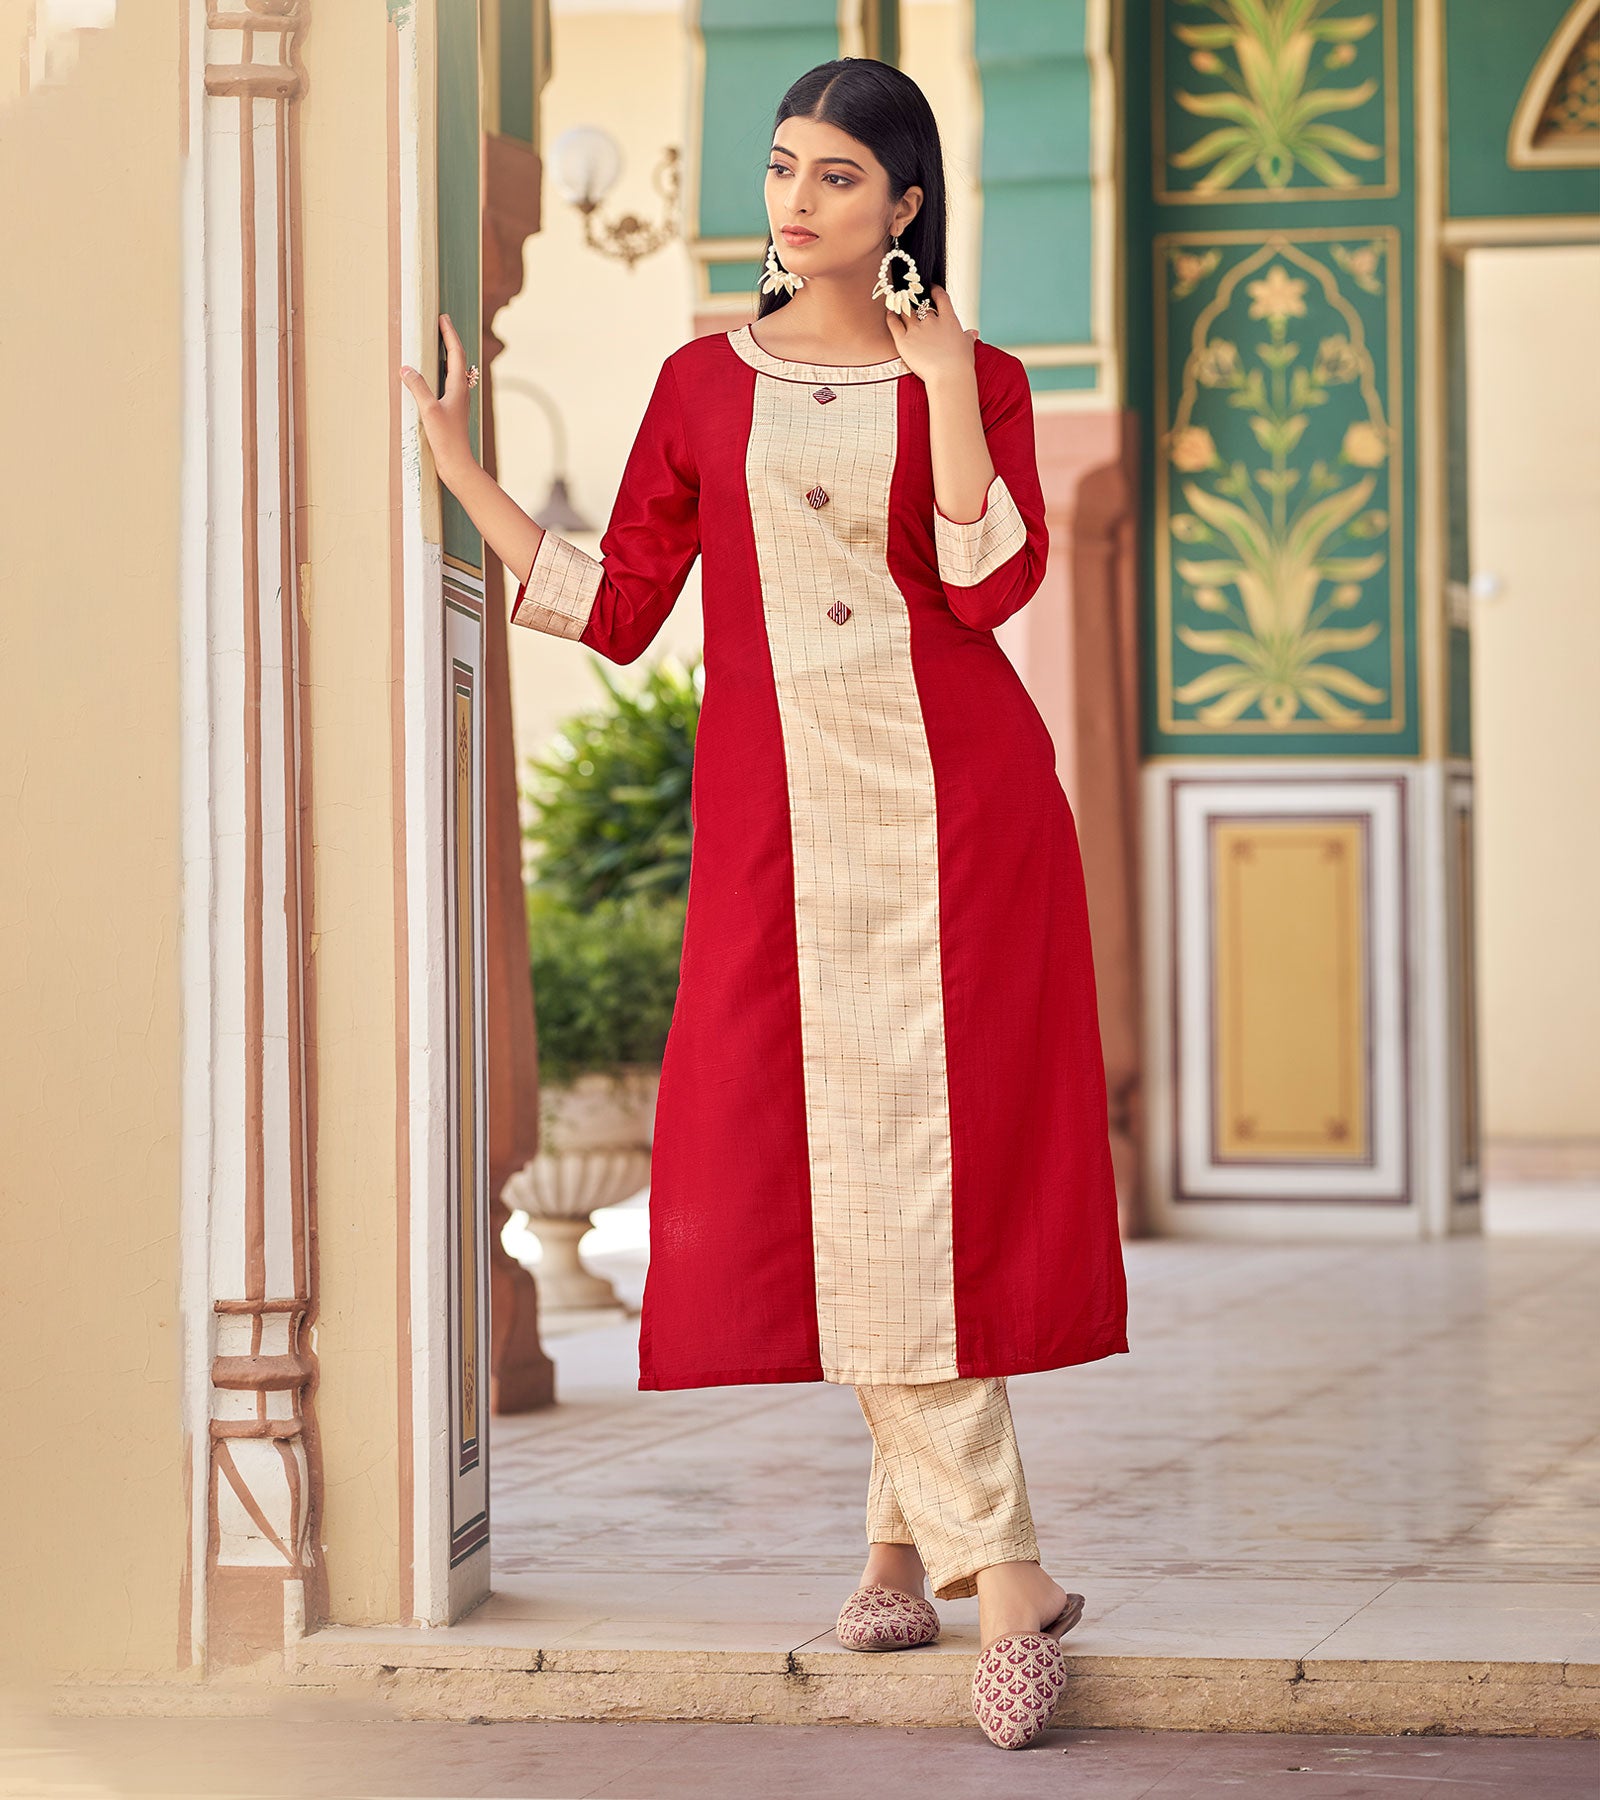 Buy Indian Dots Women Cotton Red Kurta Sets with Golden Dupatta at Amazon.in